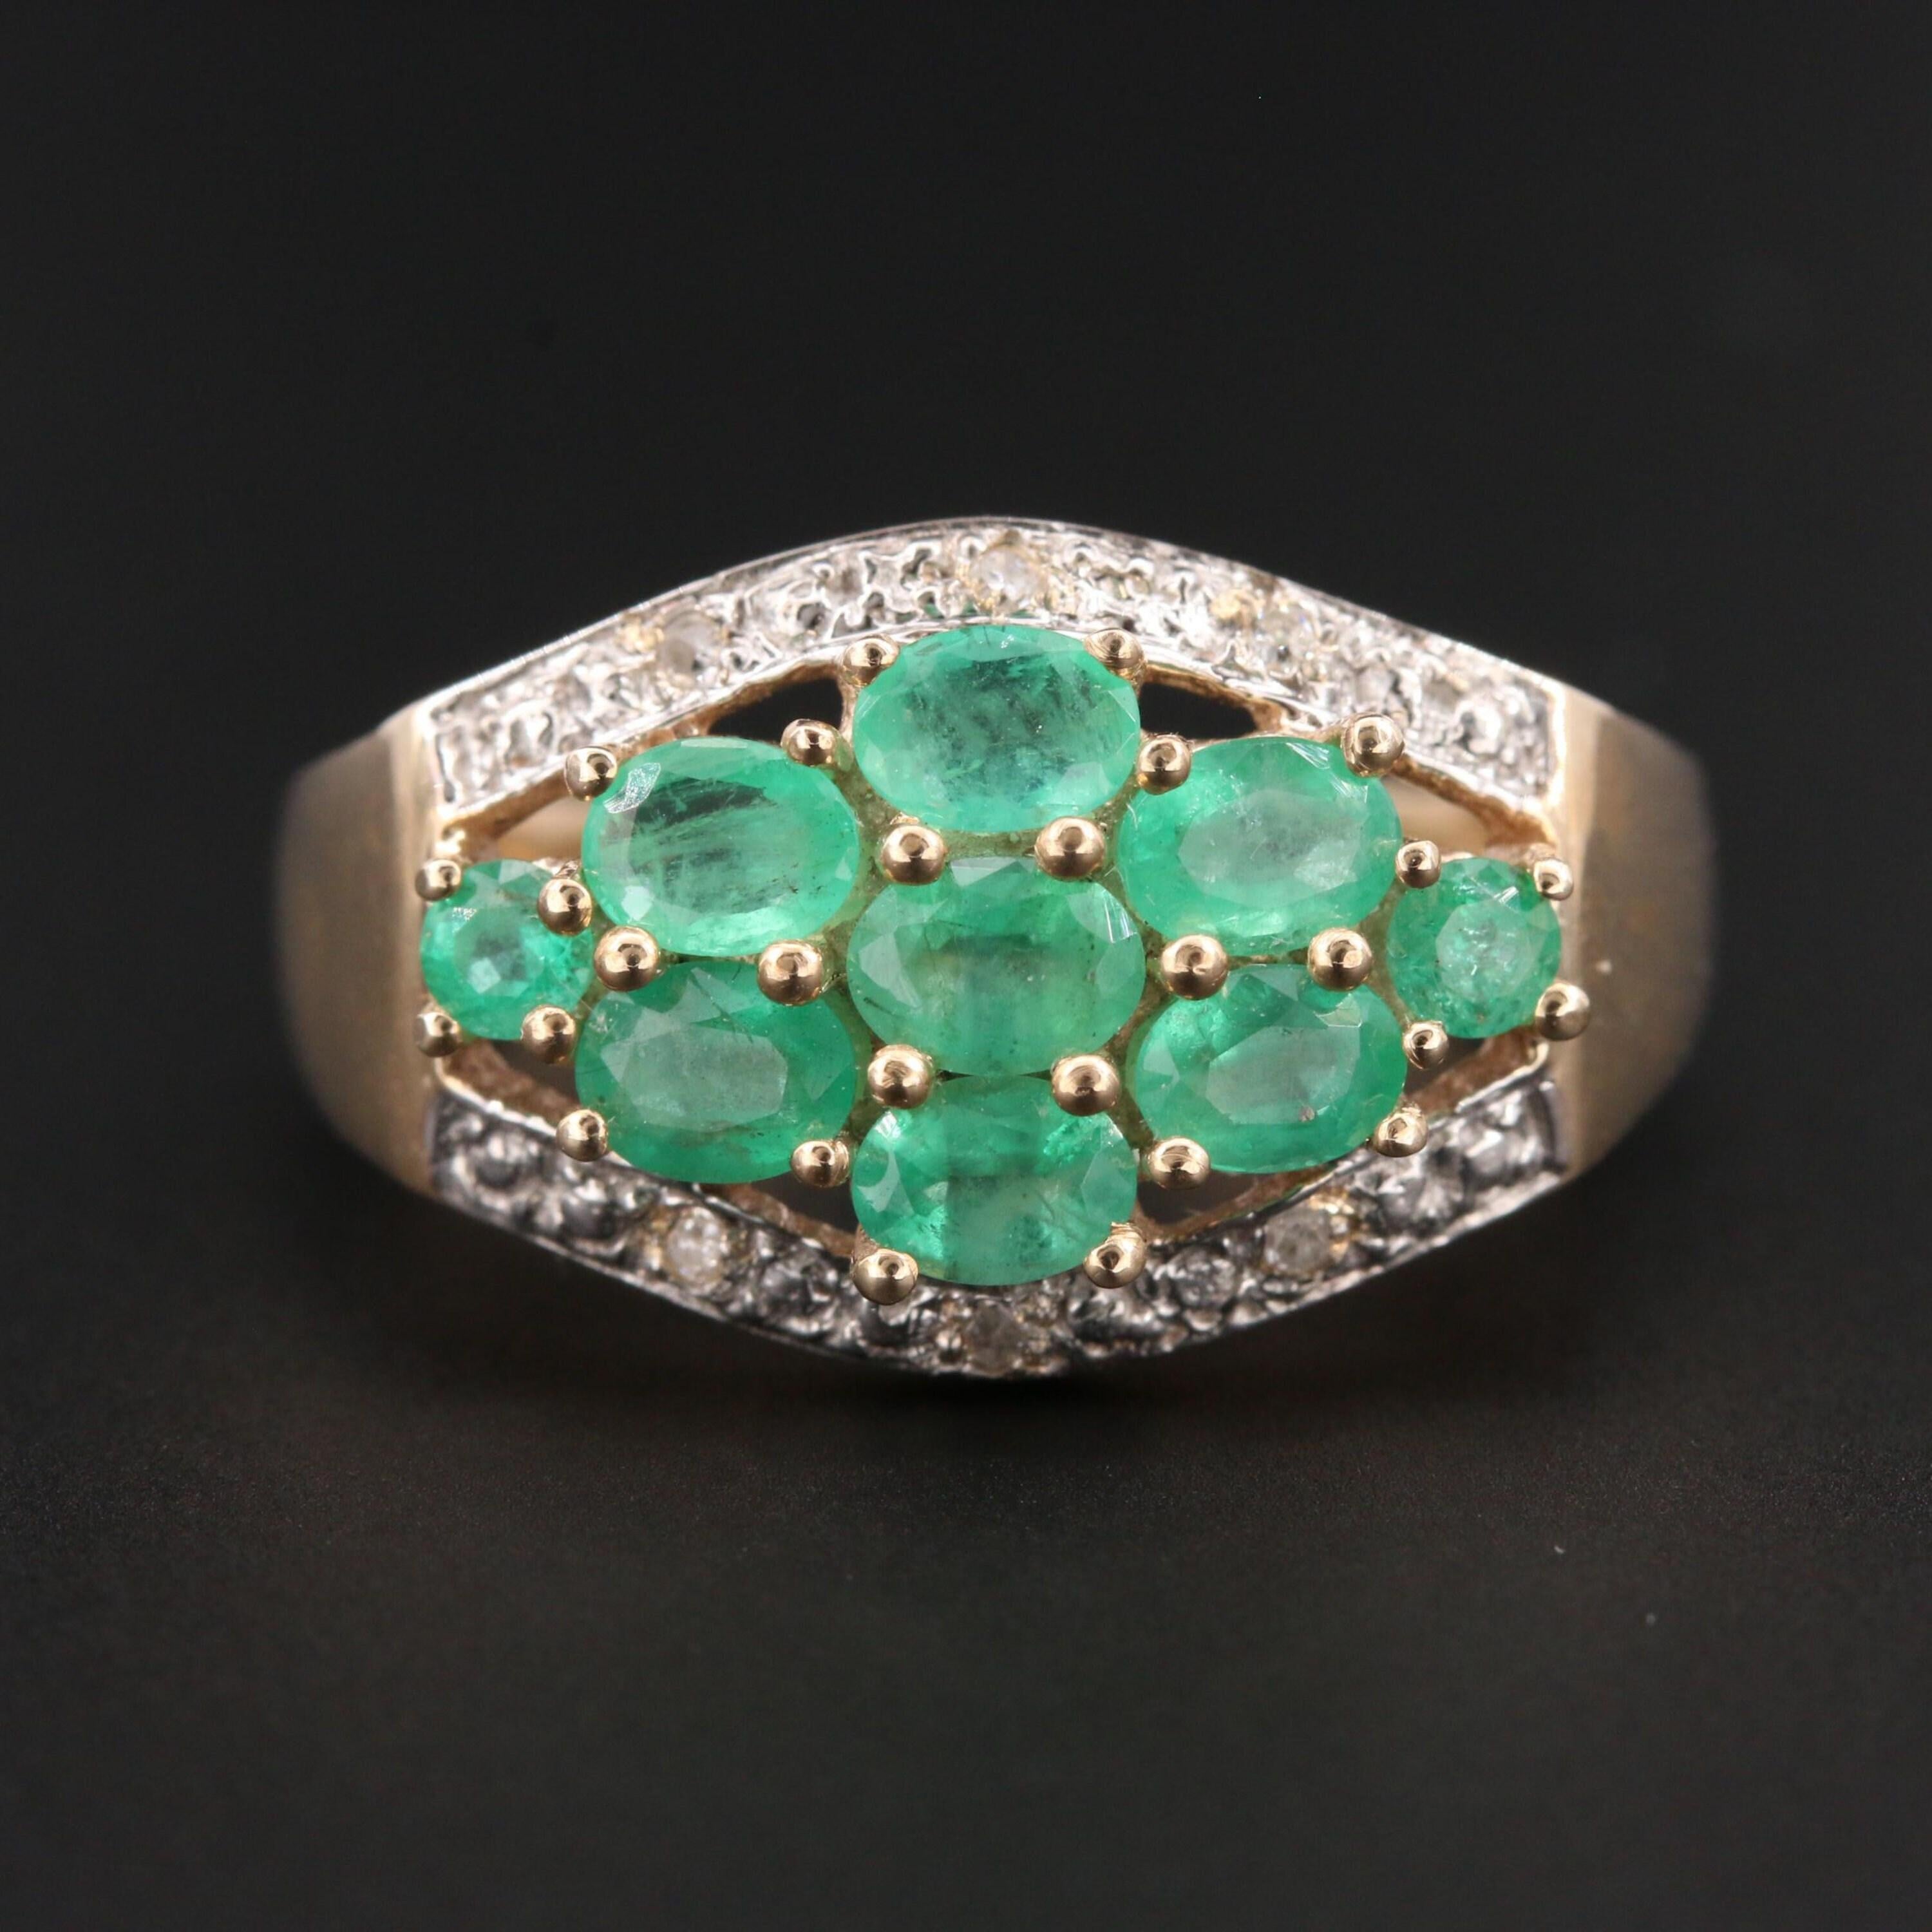 For Sale:  Halo Emerald Engagement Ring, Antique Emerald Wedding Ring 2